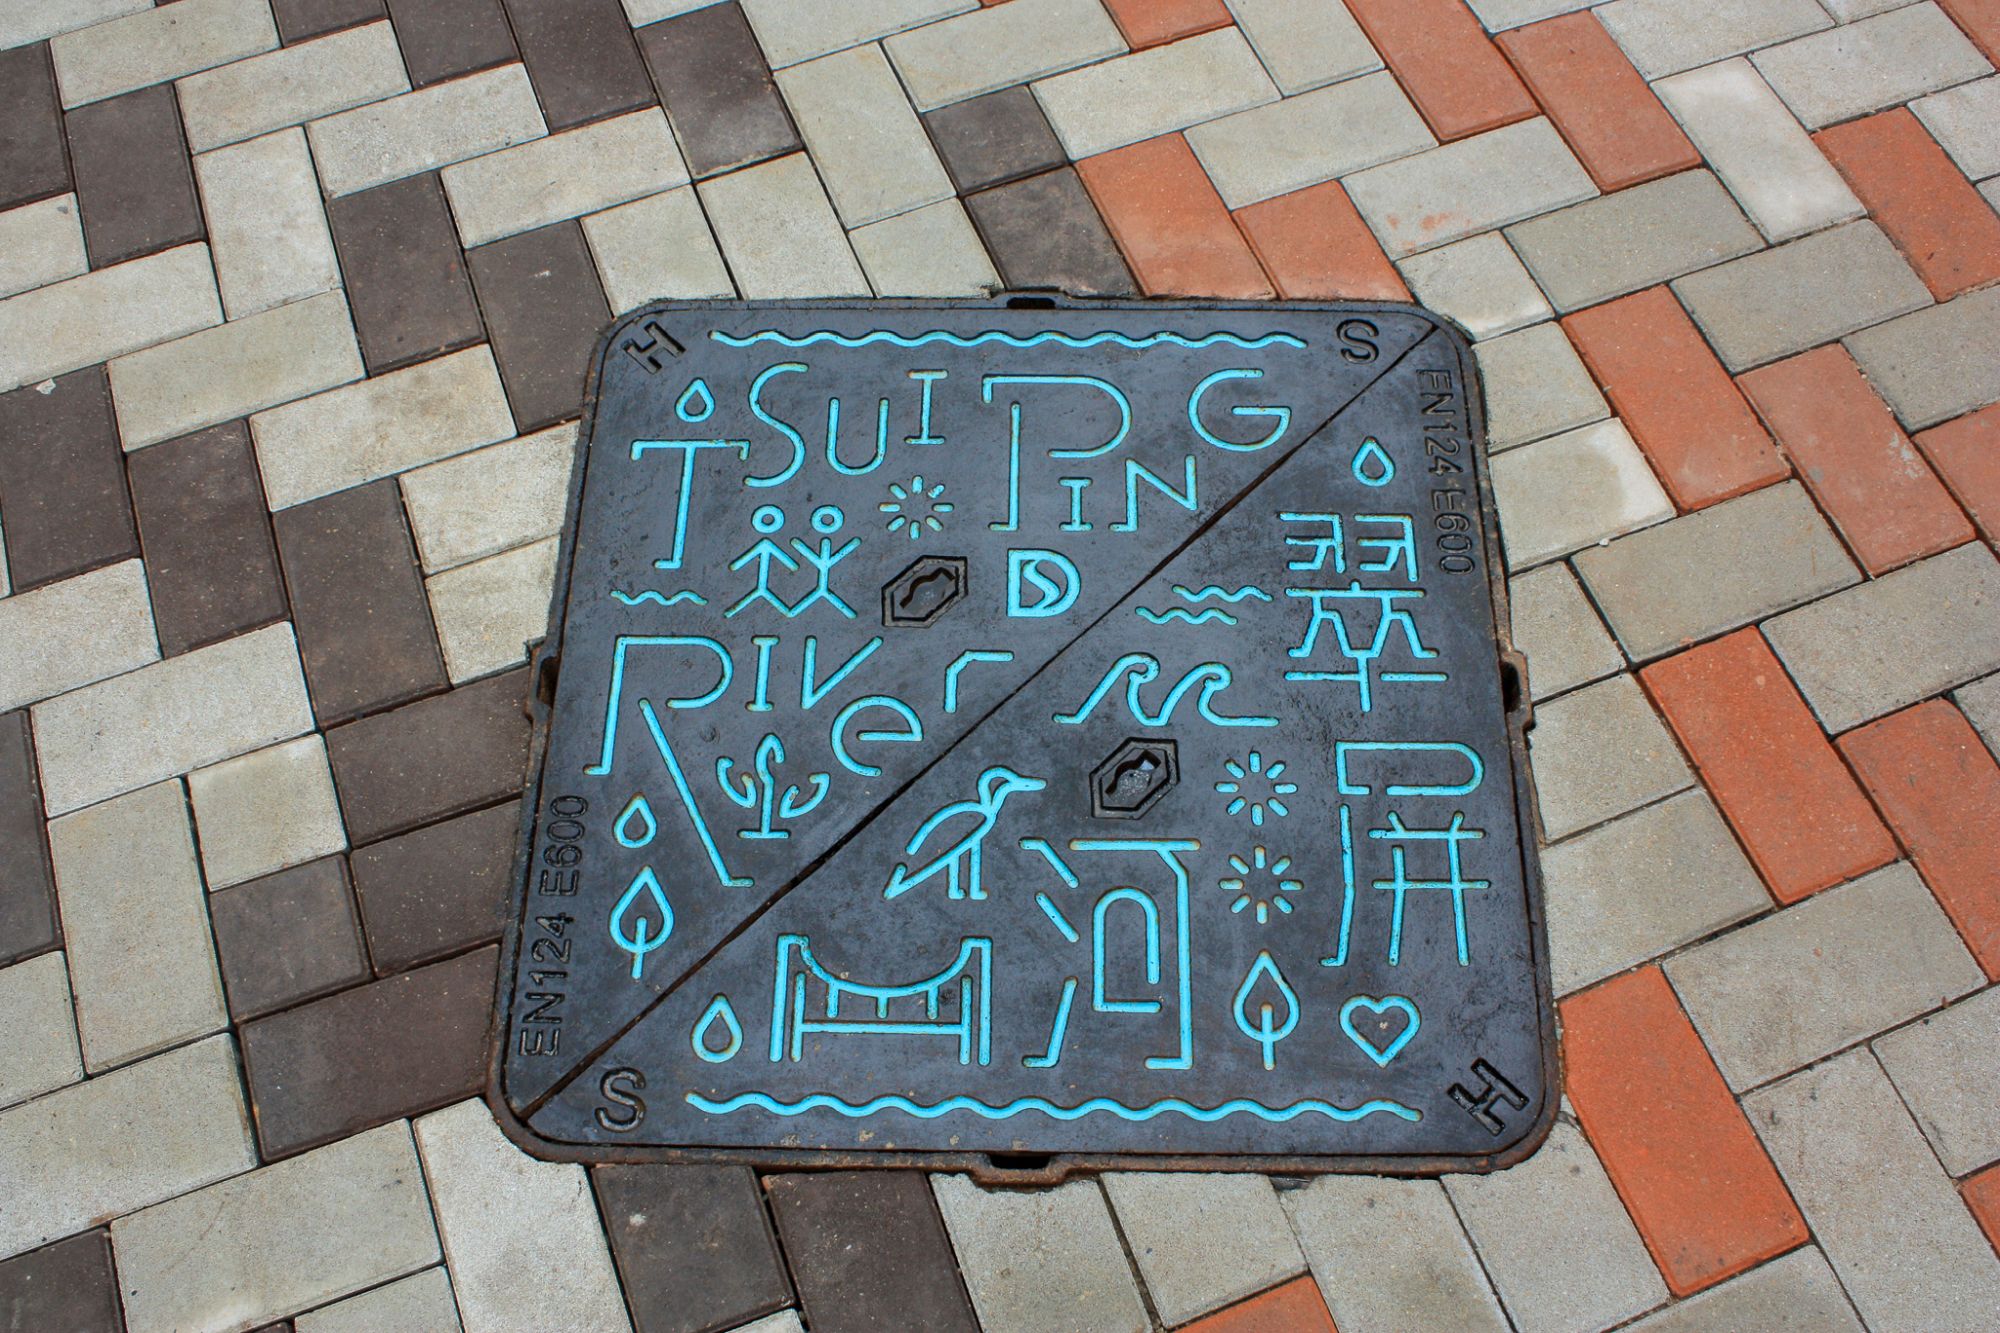 Thematic manhole covers located at Tsui Ping River.